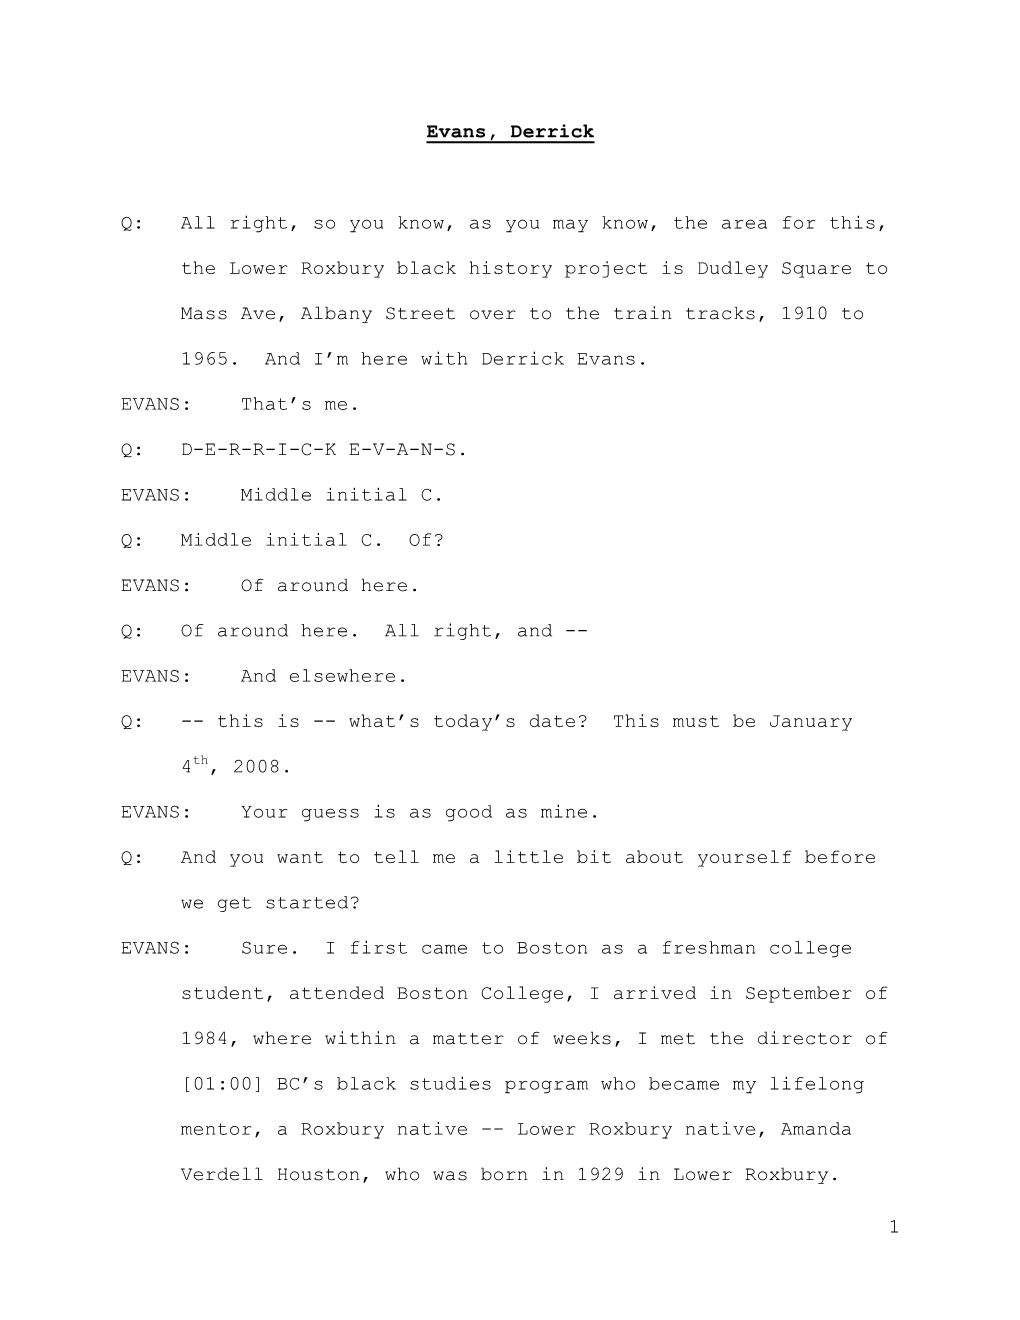 Transcript of Interview with Derrick Evans, January 4, 2008